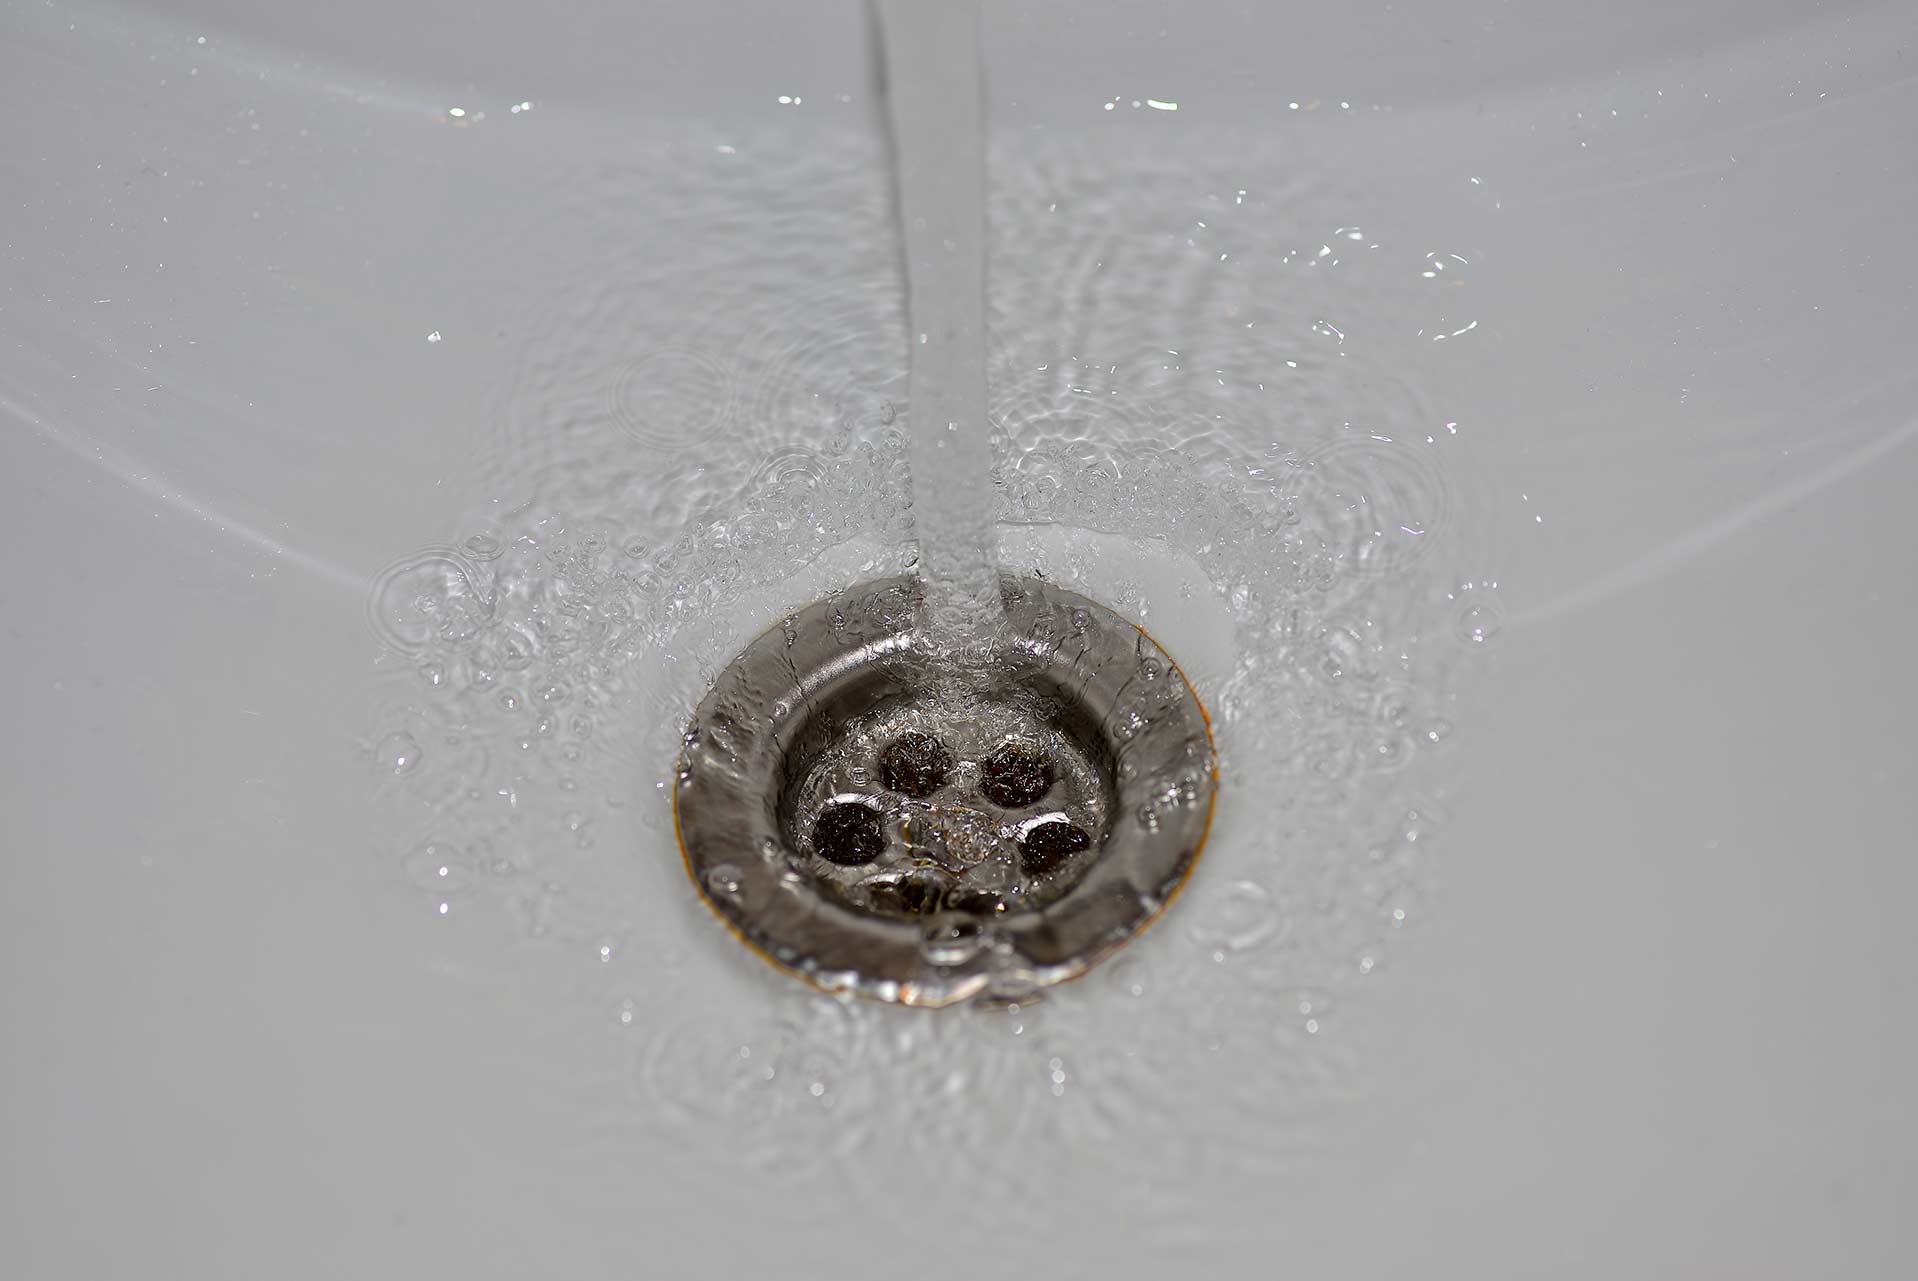 A2B Drains provides services to unblock blocked sinks and drains for properties in Bristol.